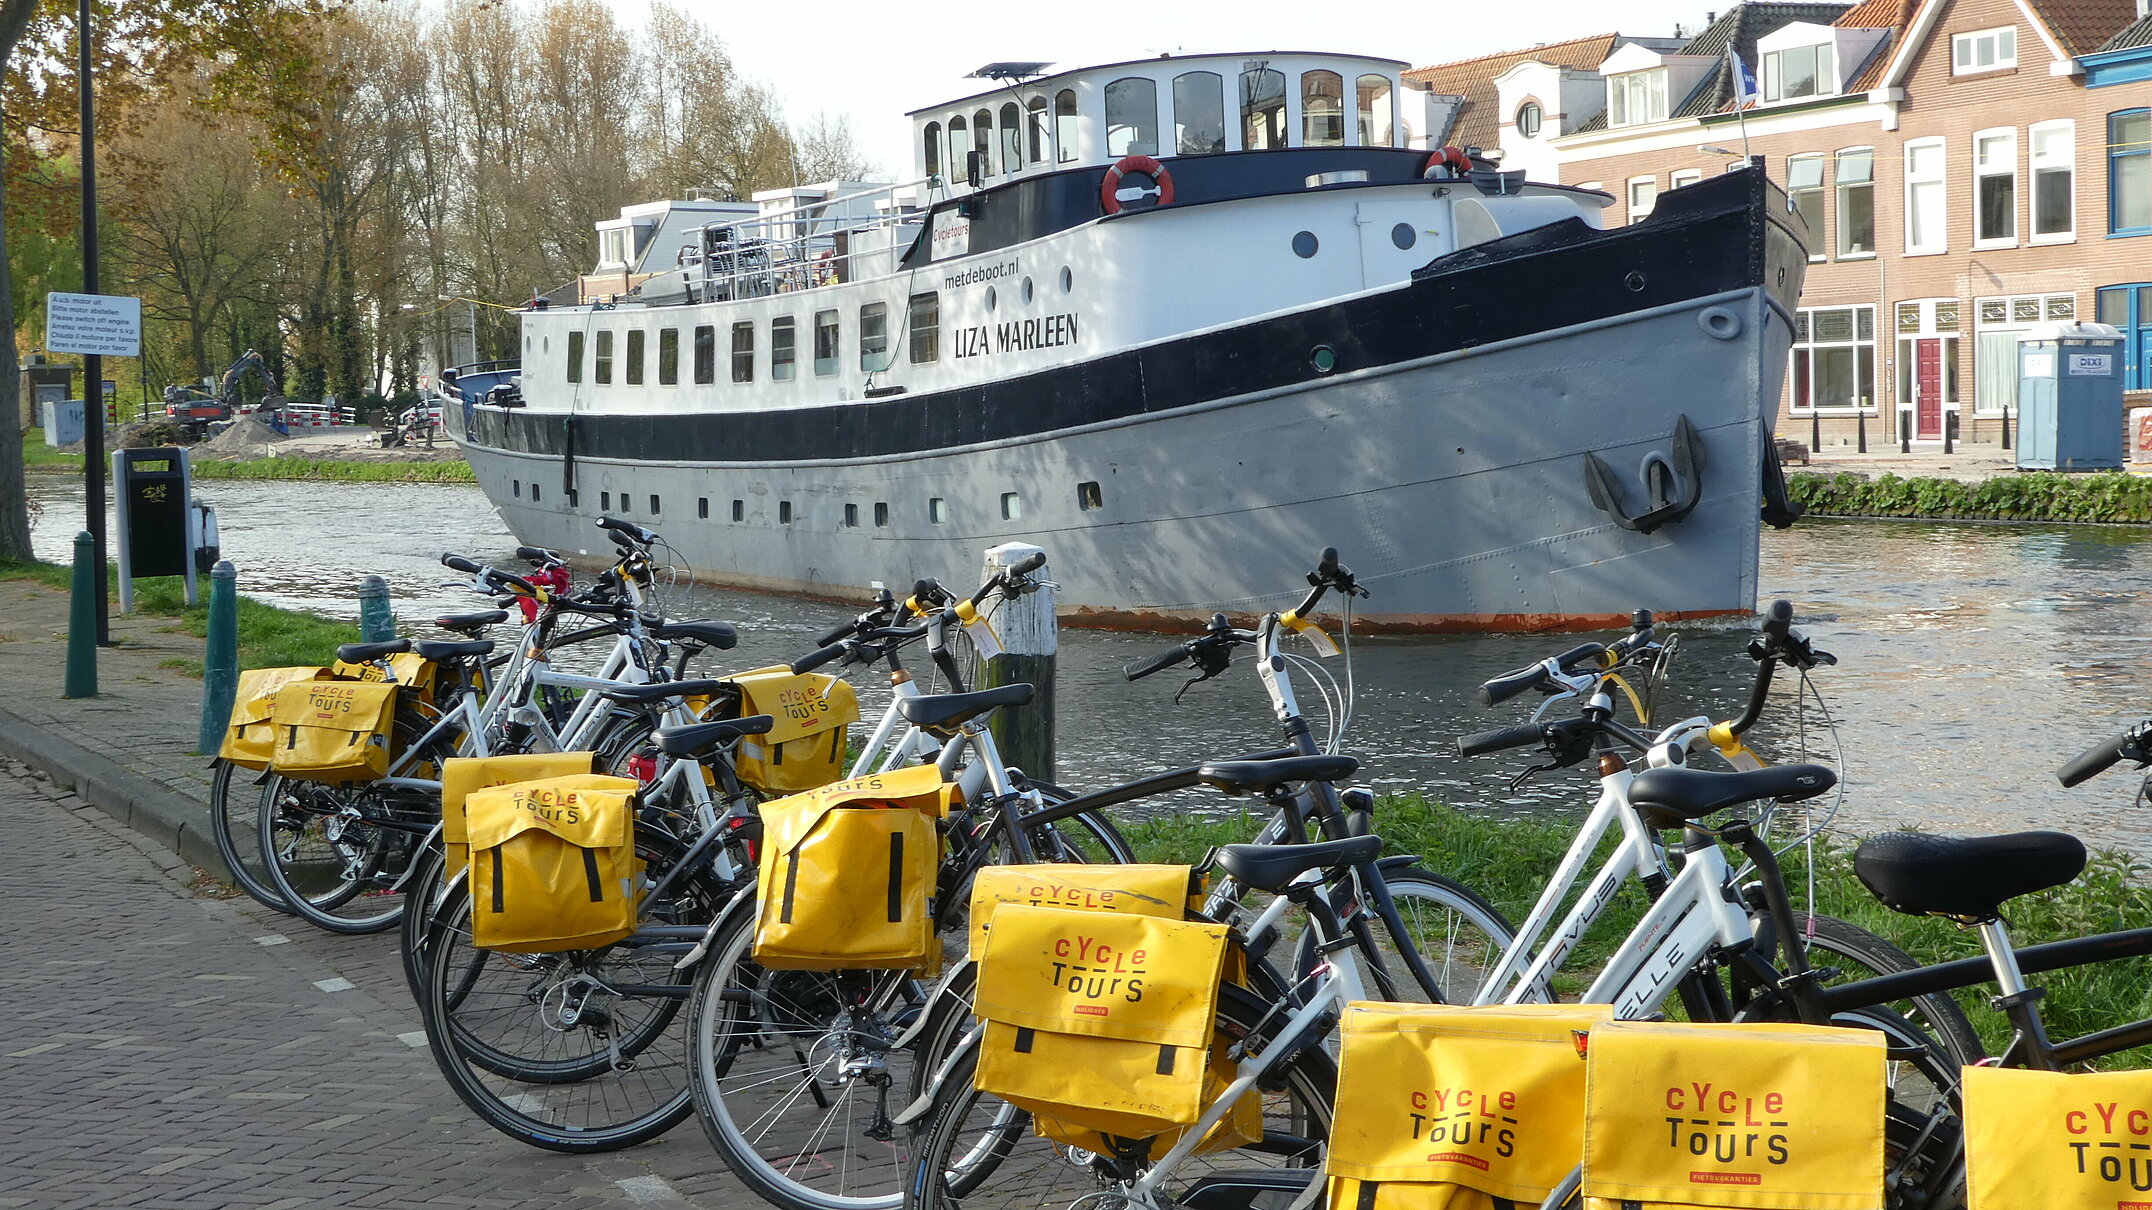 Cycletours Holidays Barges Liza Marleen Side View with Bikes